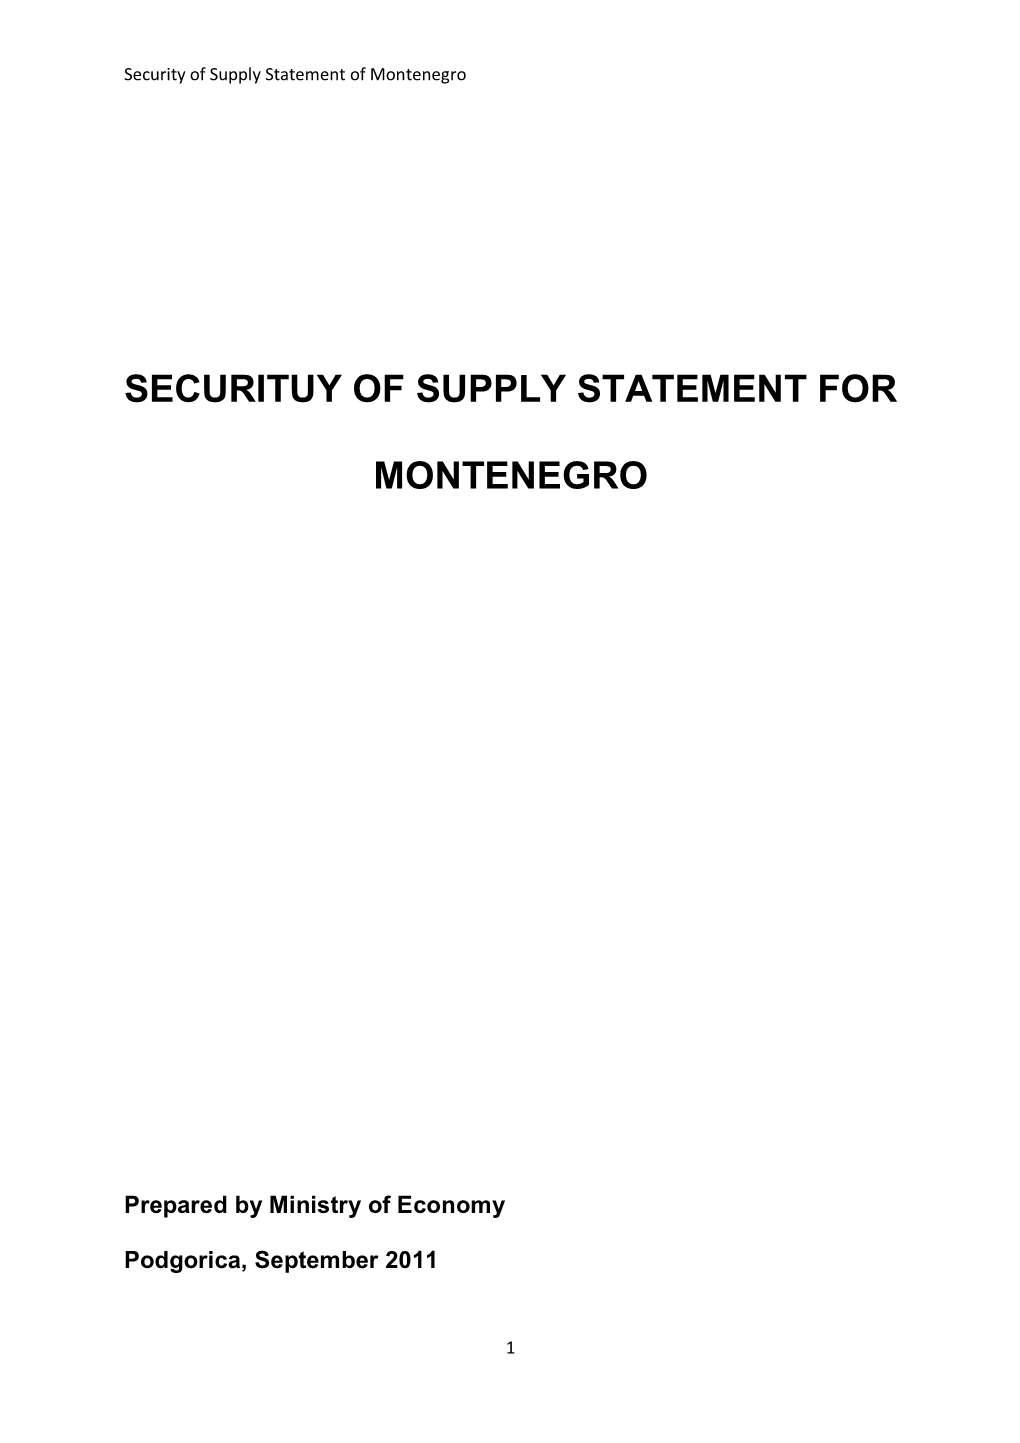 Securituy of Supply Statement for Montenegro